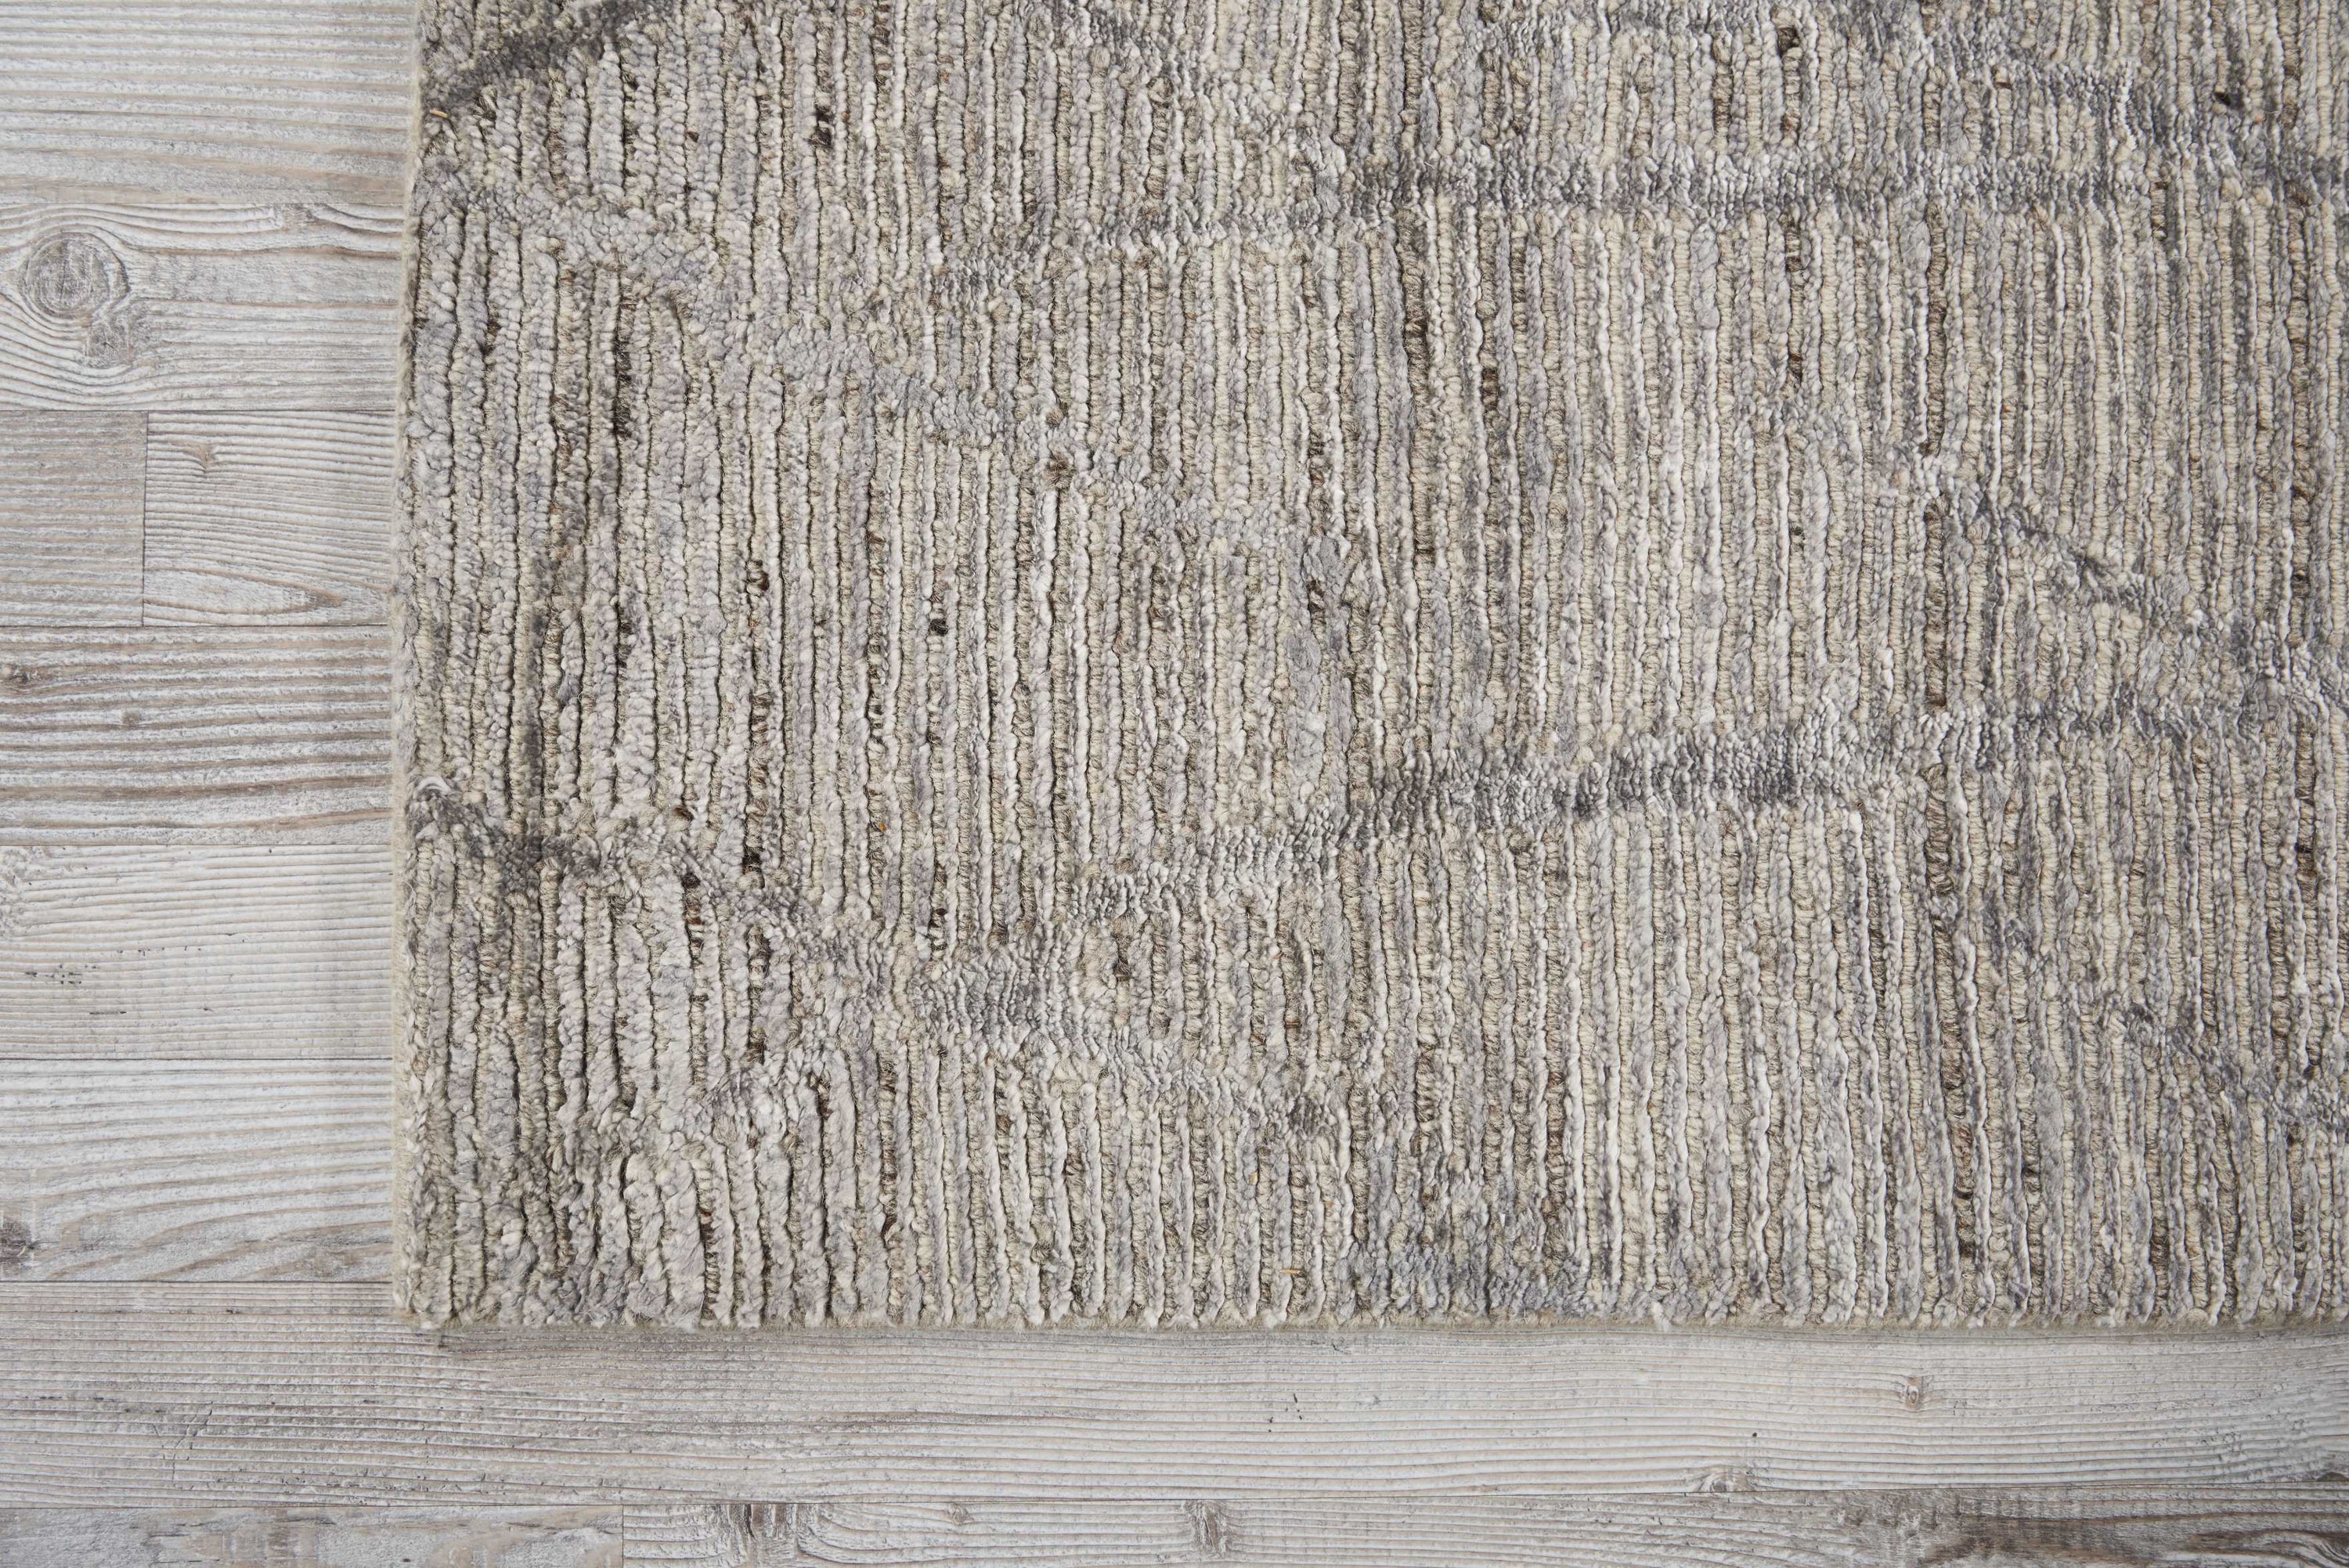 Close-up view of a textured rug meeting a wooden floor.